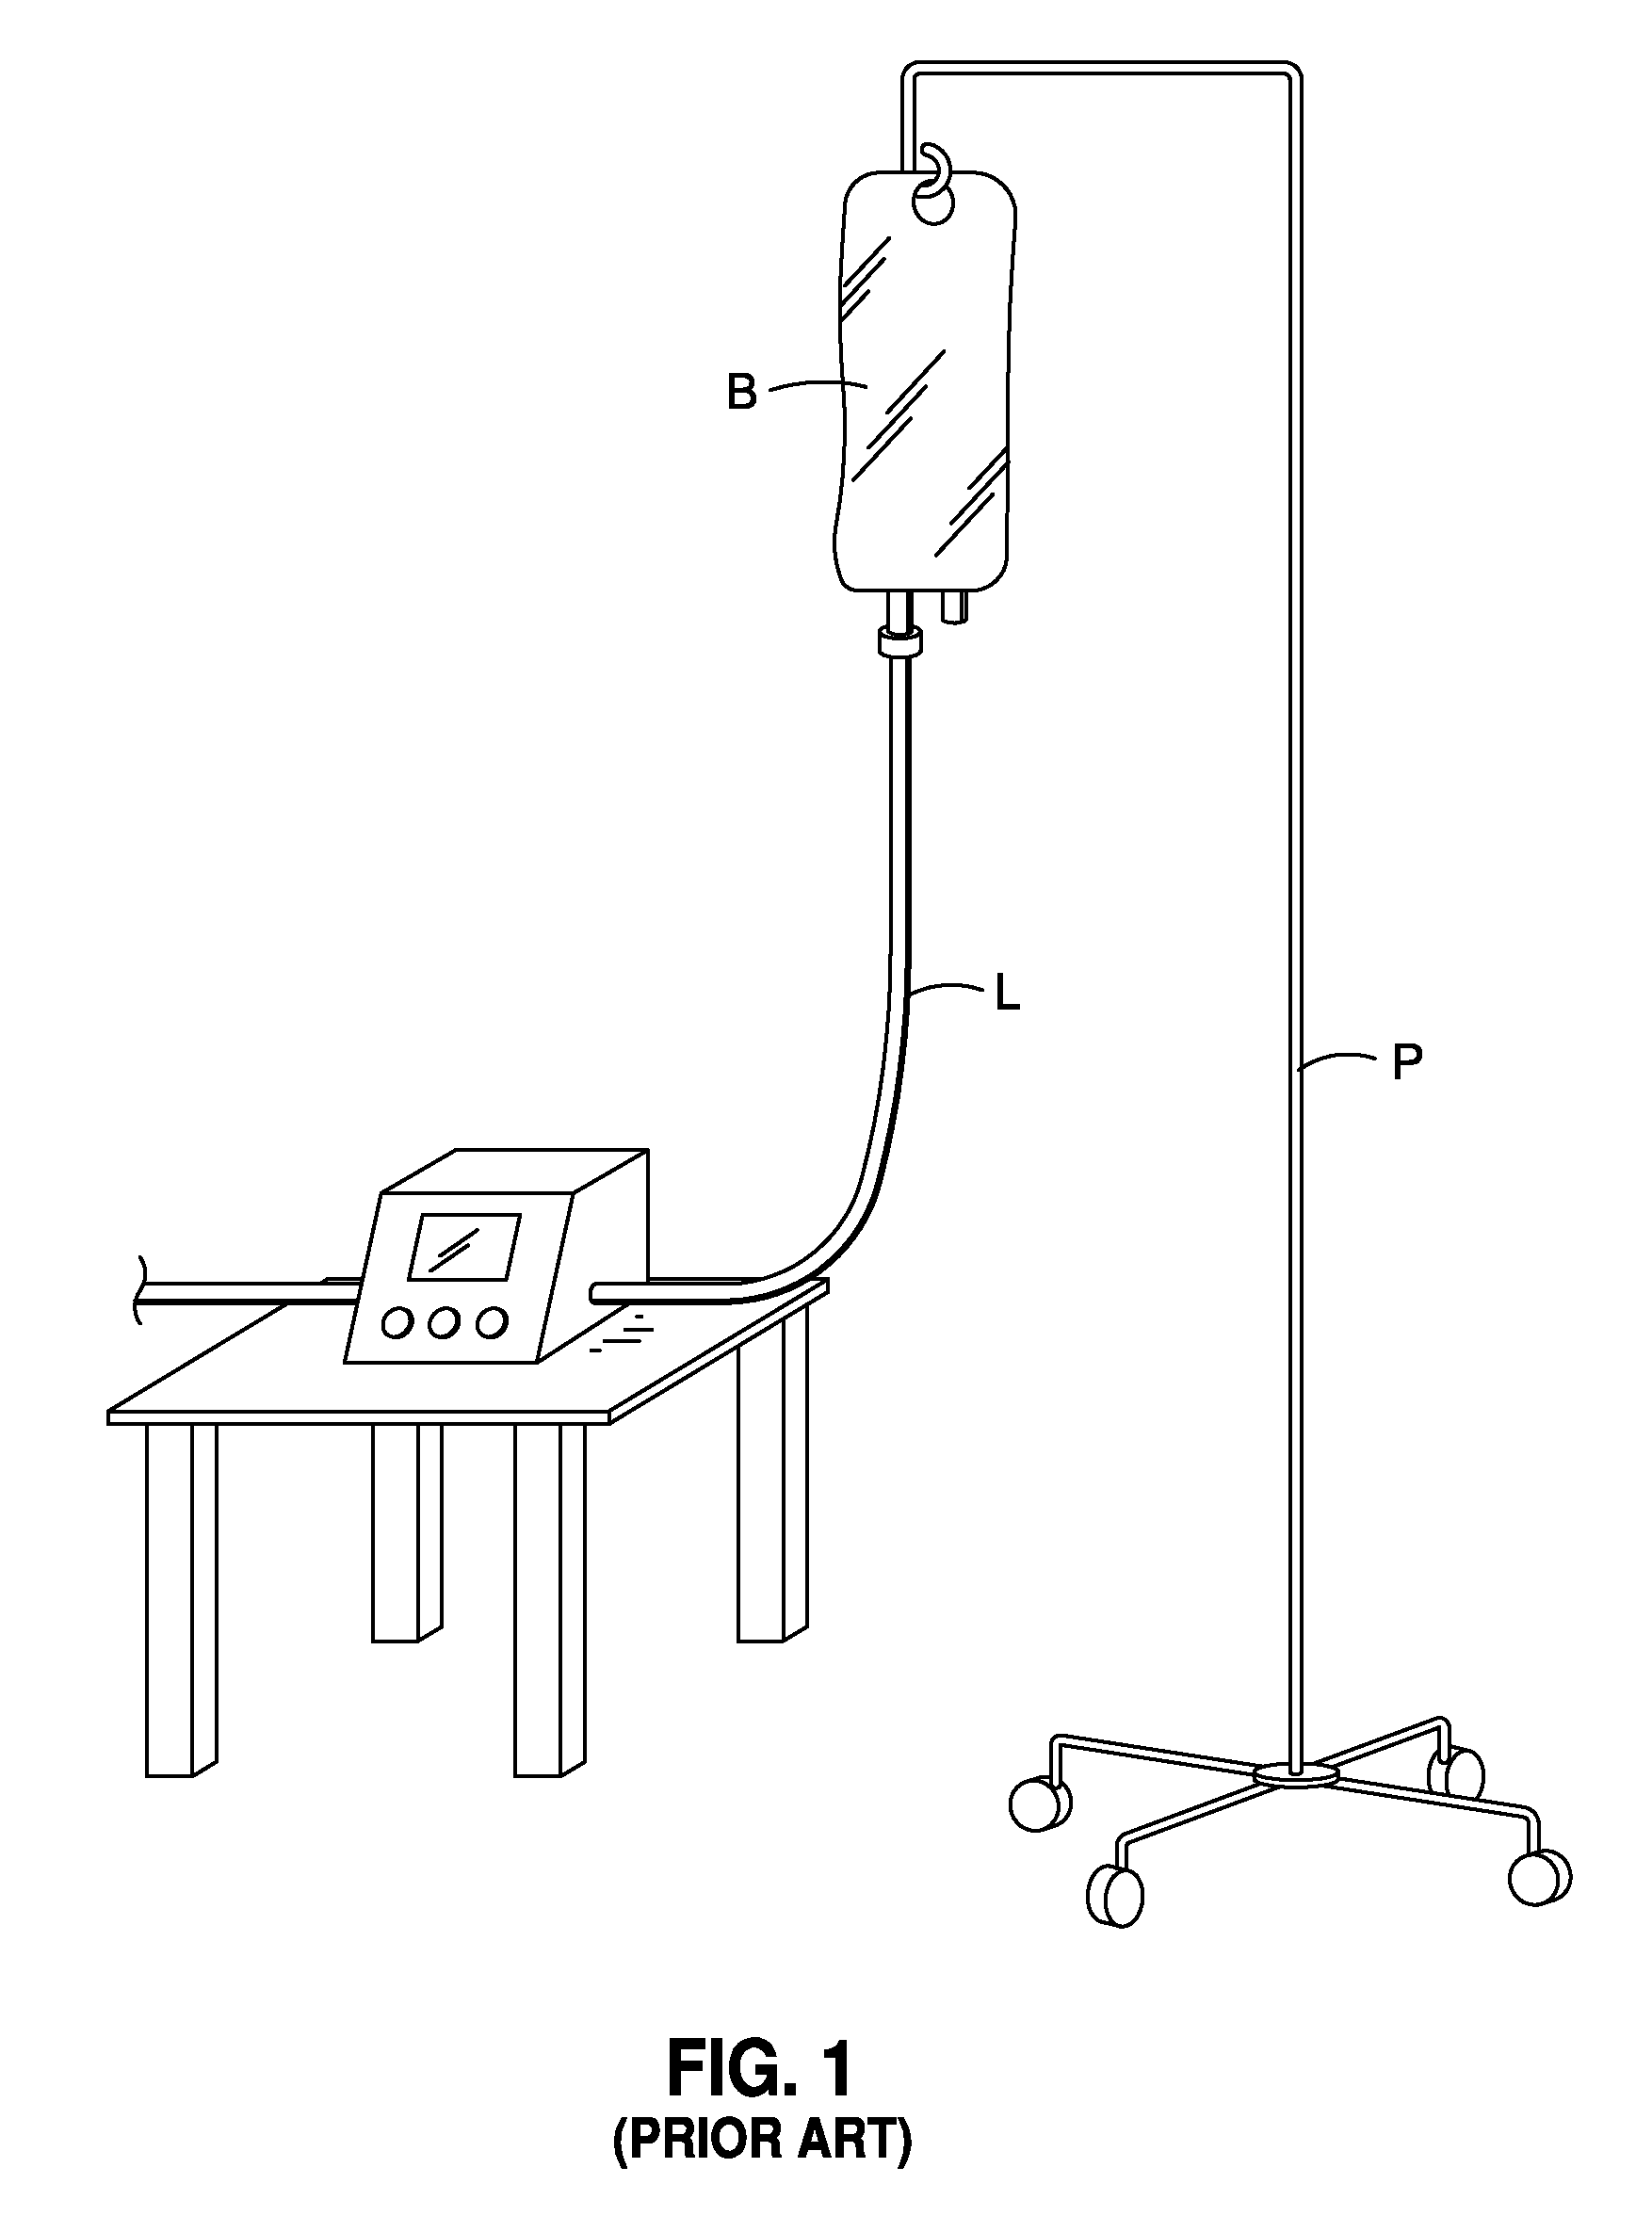 Automated intravenous fluid container delivery device and system